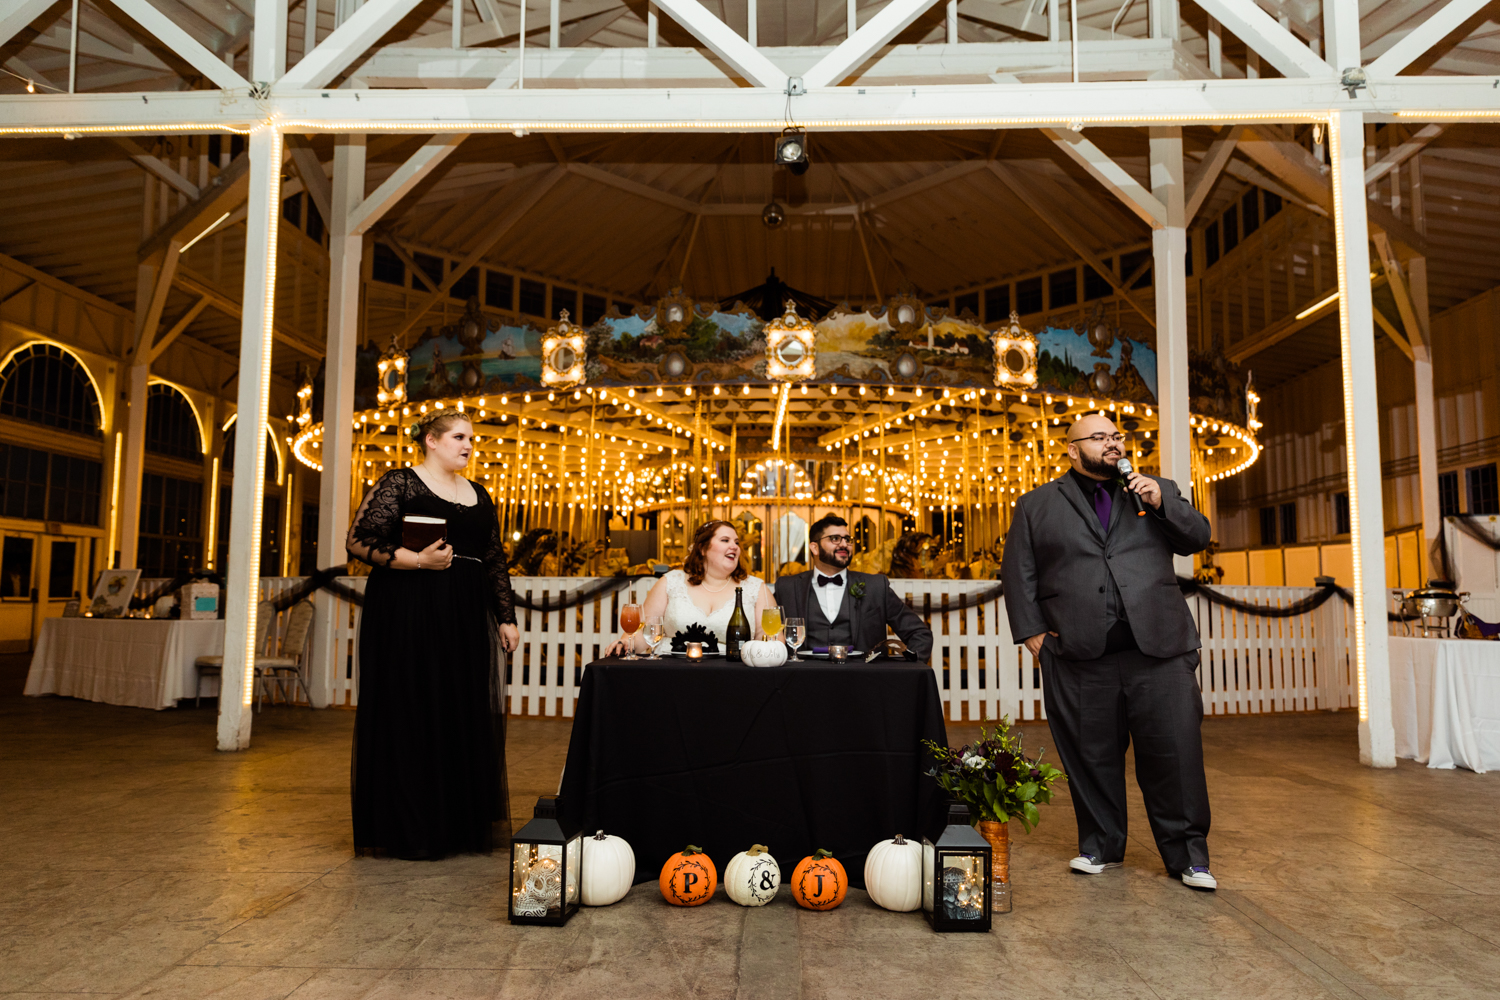 Wedding day speeches in front of carousel